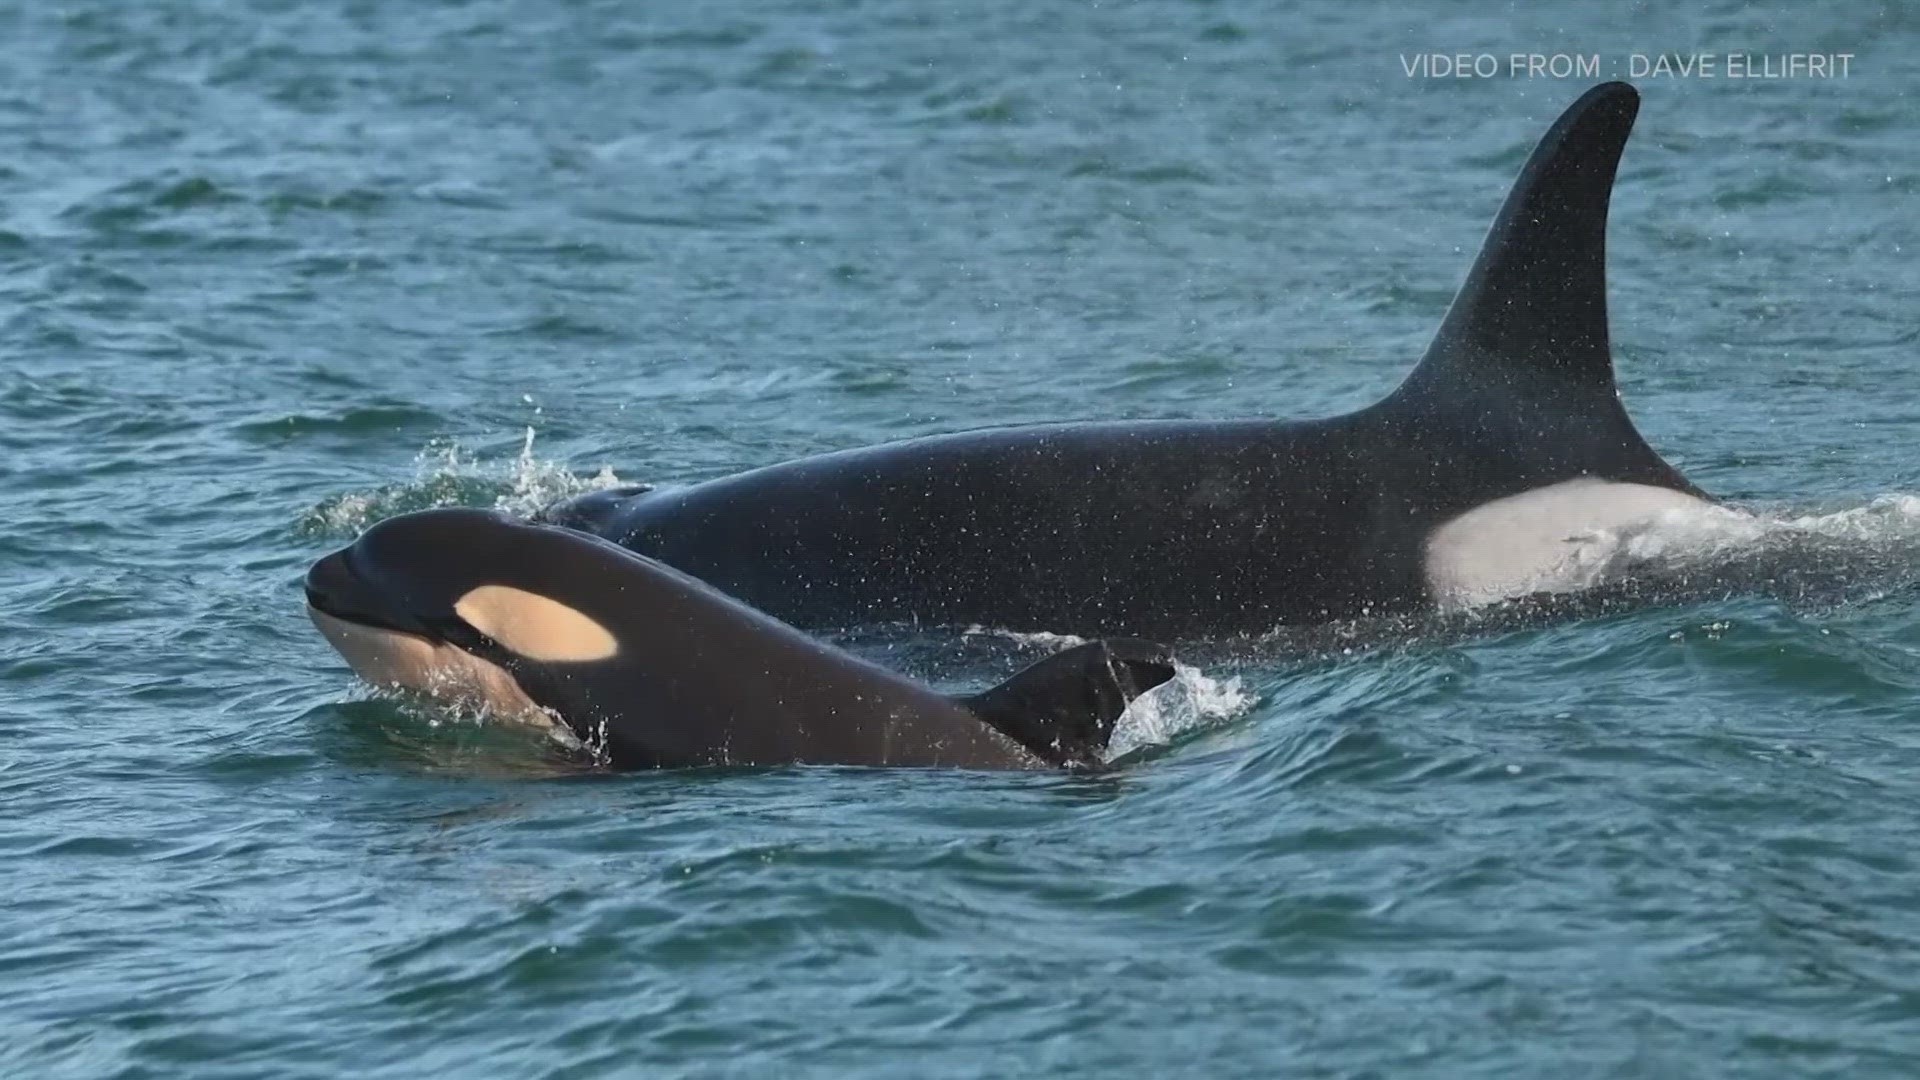 Researchers predict there will be less than two dozen orcas left within a century. There are 74 Southern Resident orcas alive right now.